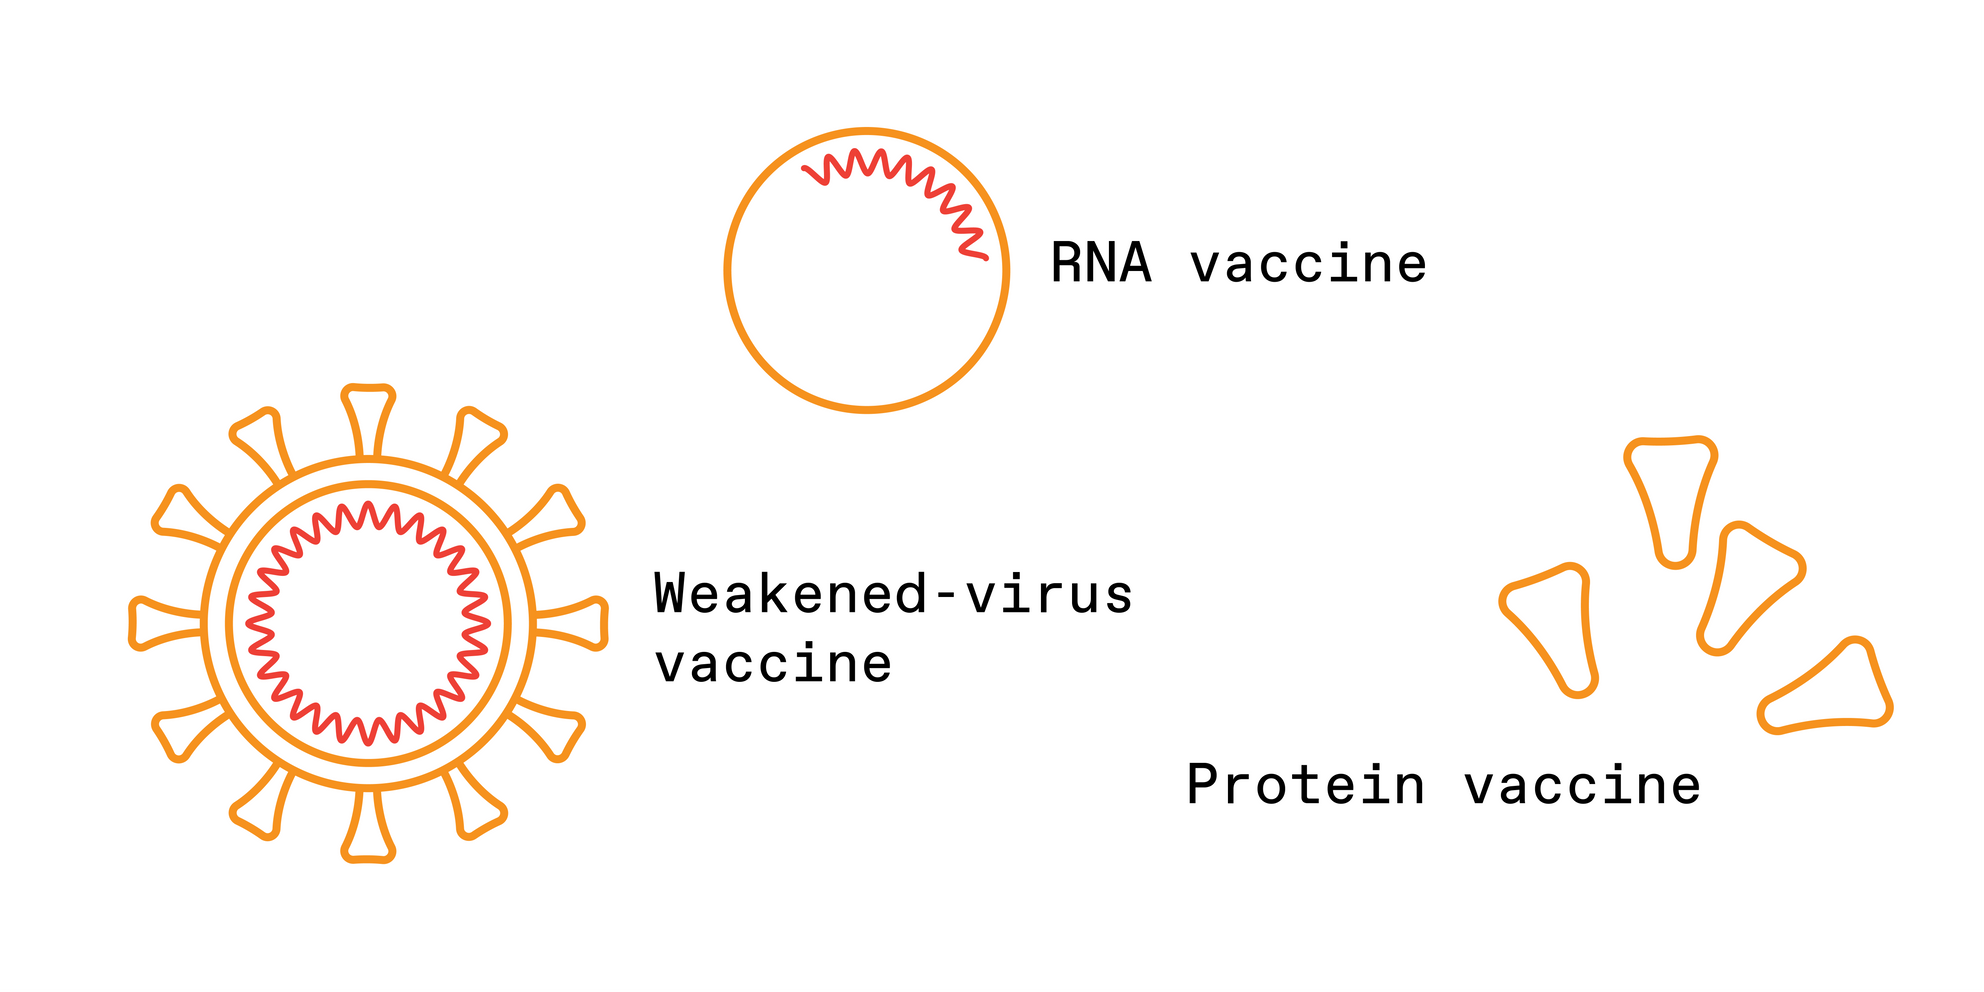 A diagram shows three objects: A spiky ball labeled "weakened-virus vaccine," a circle with a squiggly line inside of it labeled "RNA vaccine," and a few spikes labeled "protein vaccine."